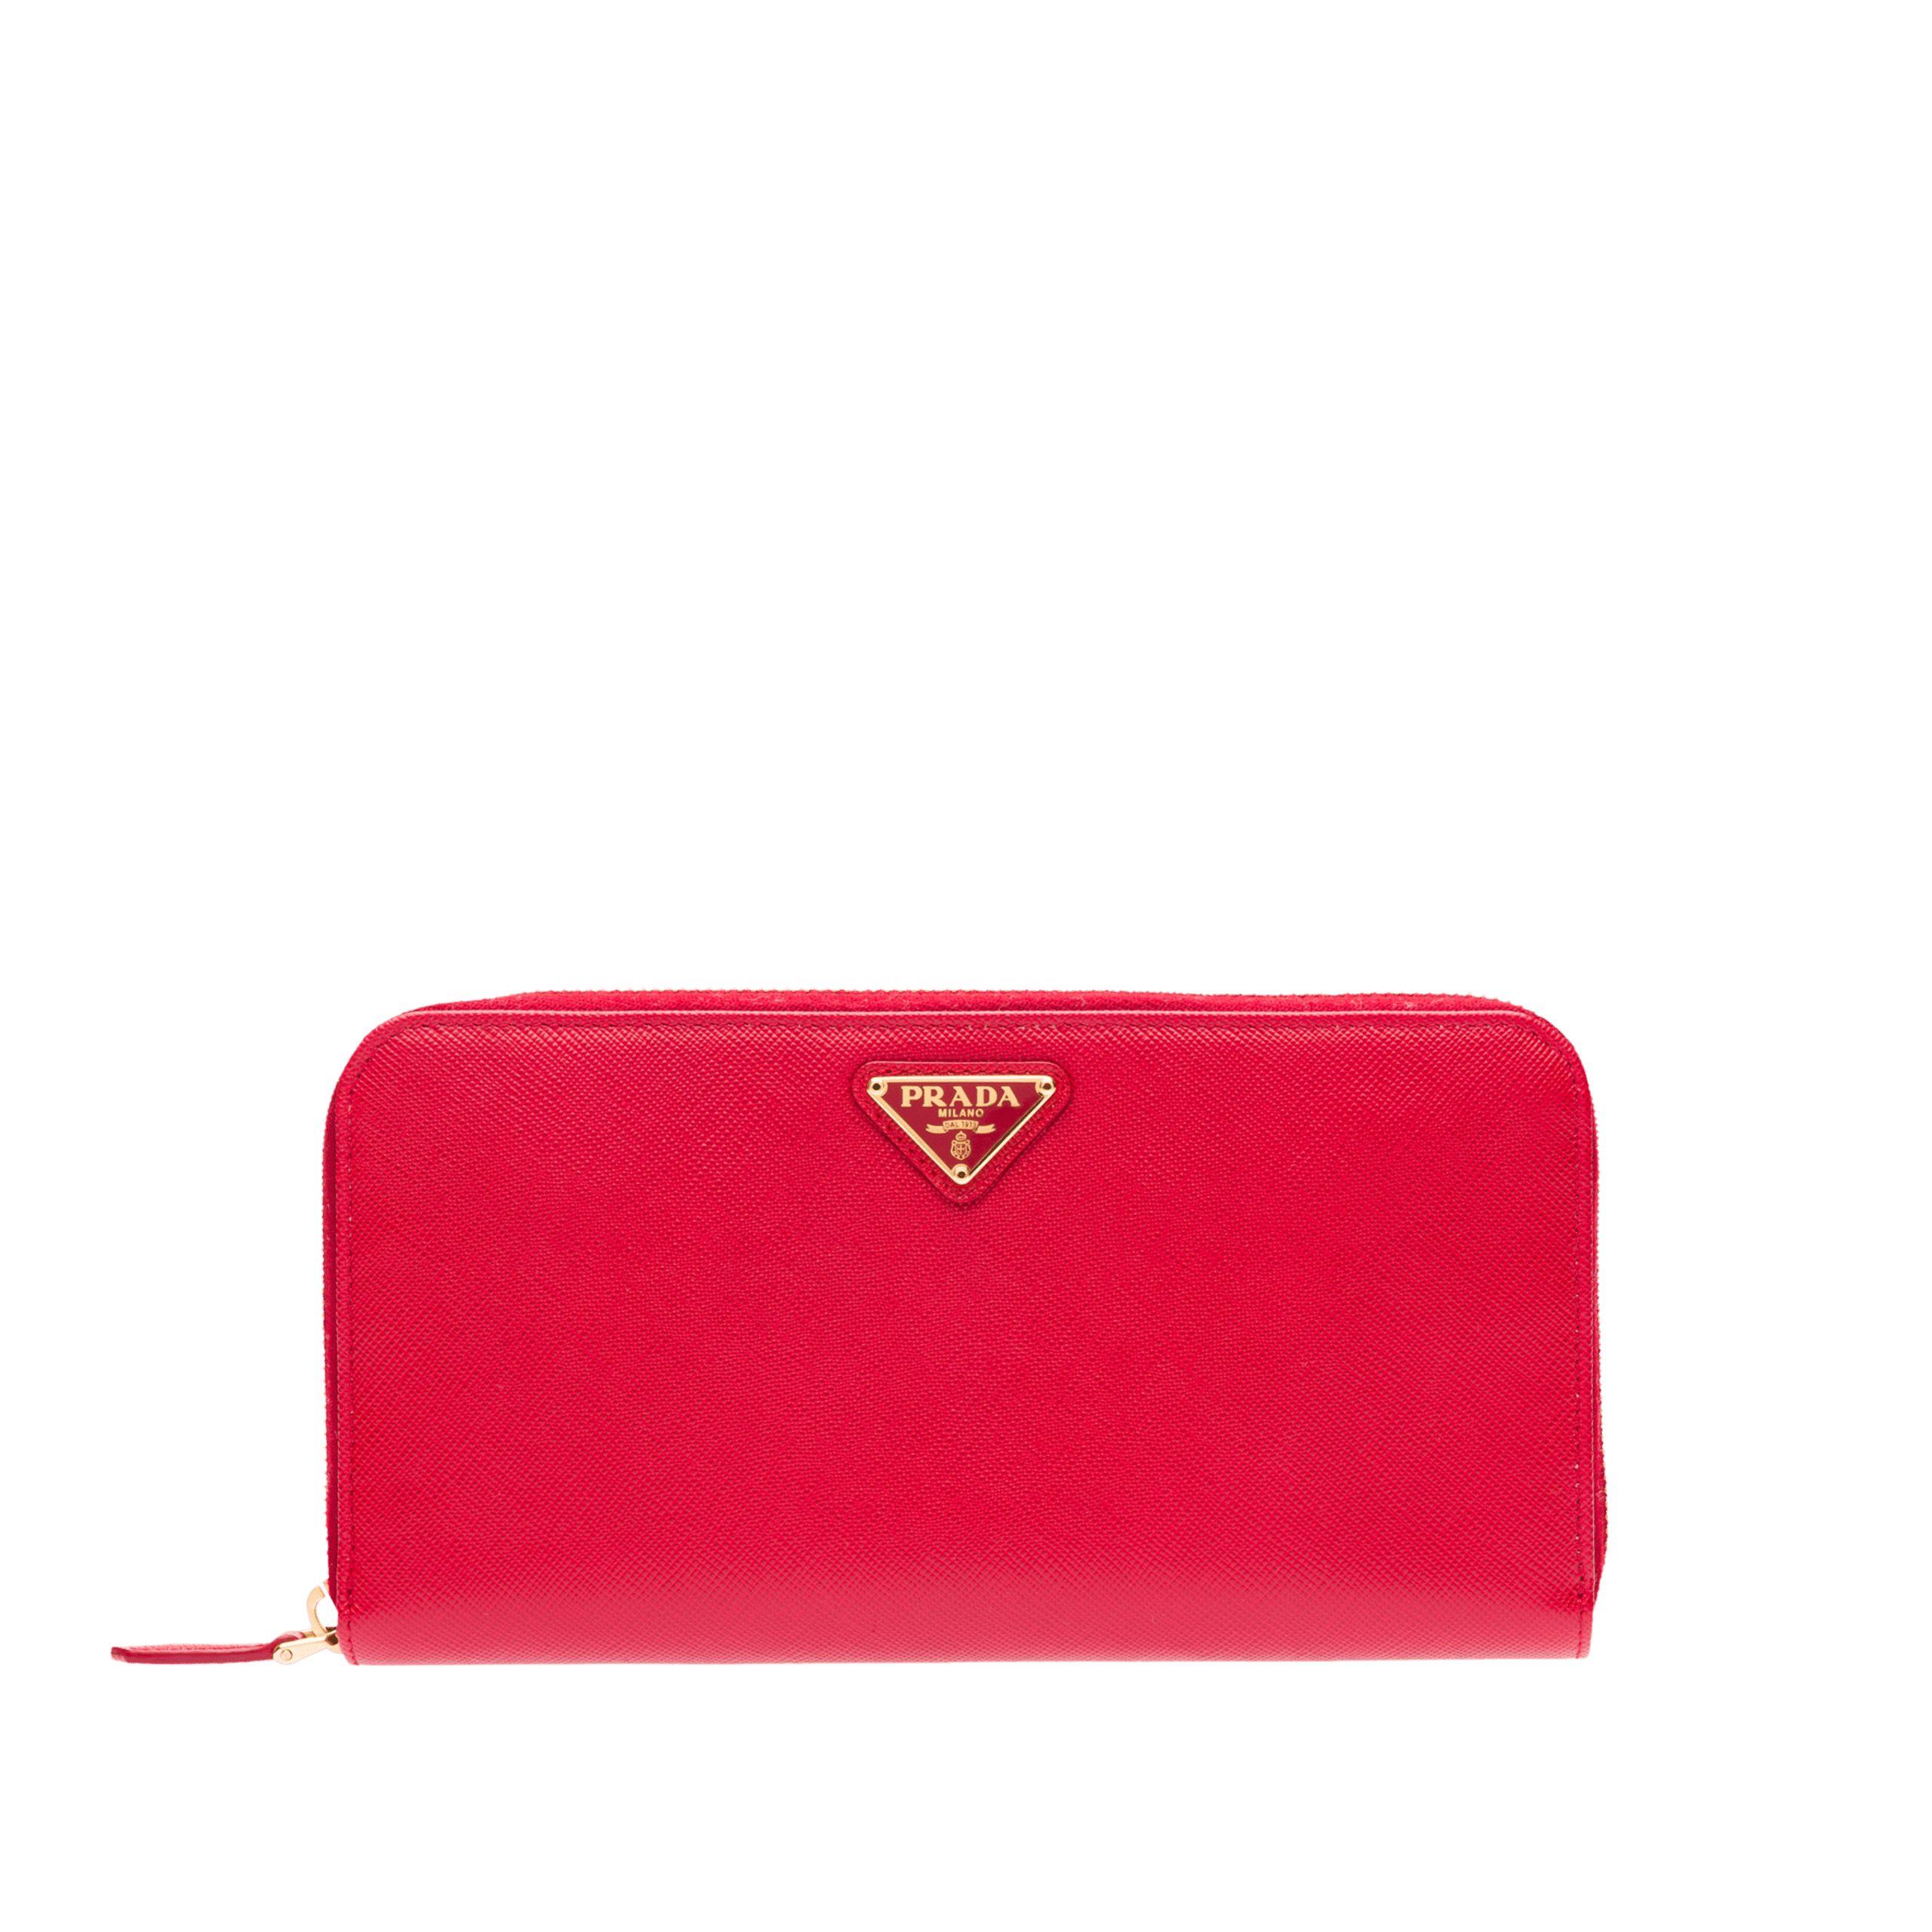 Prada Large Saffiano Leather Wallet in Red - Lyst